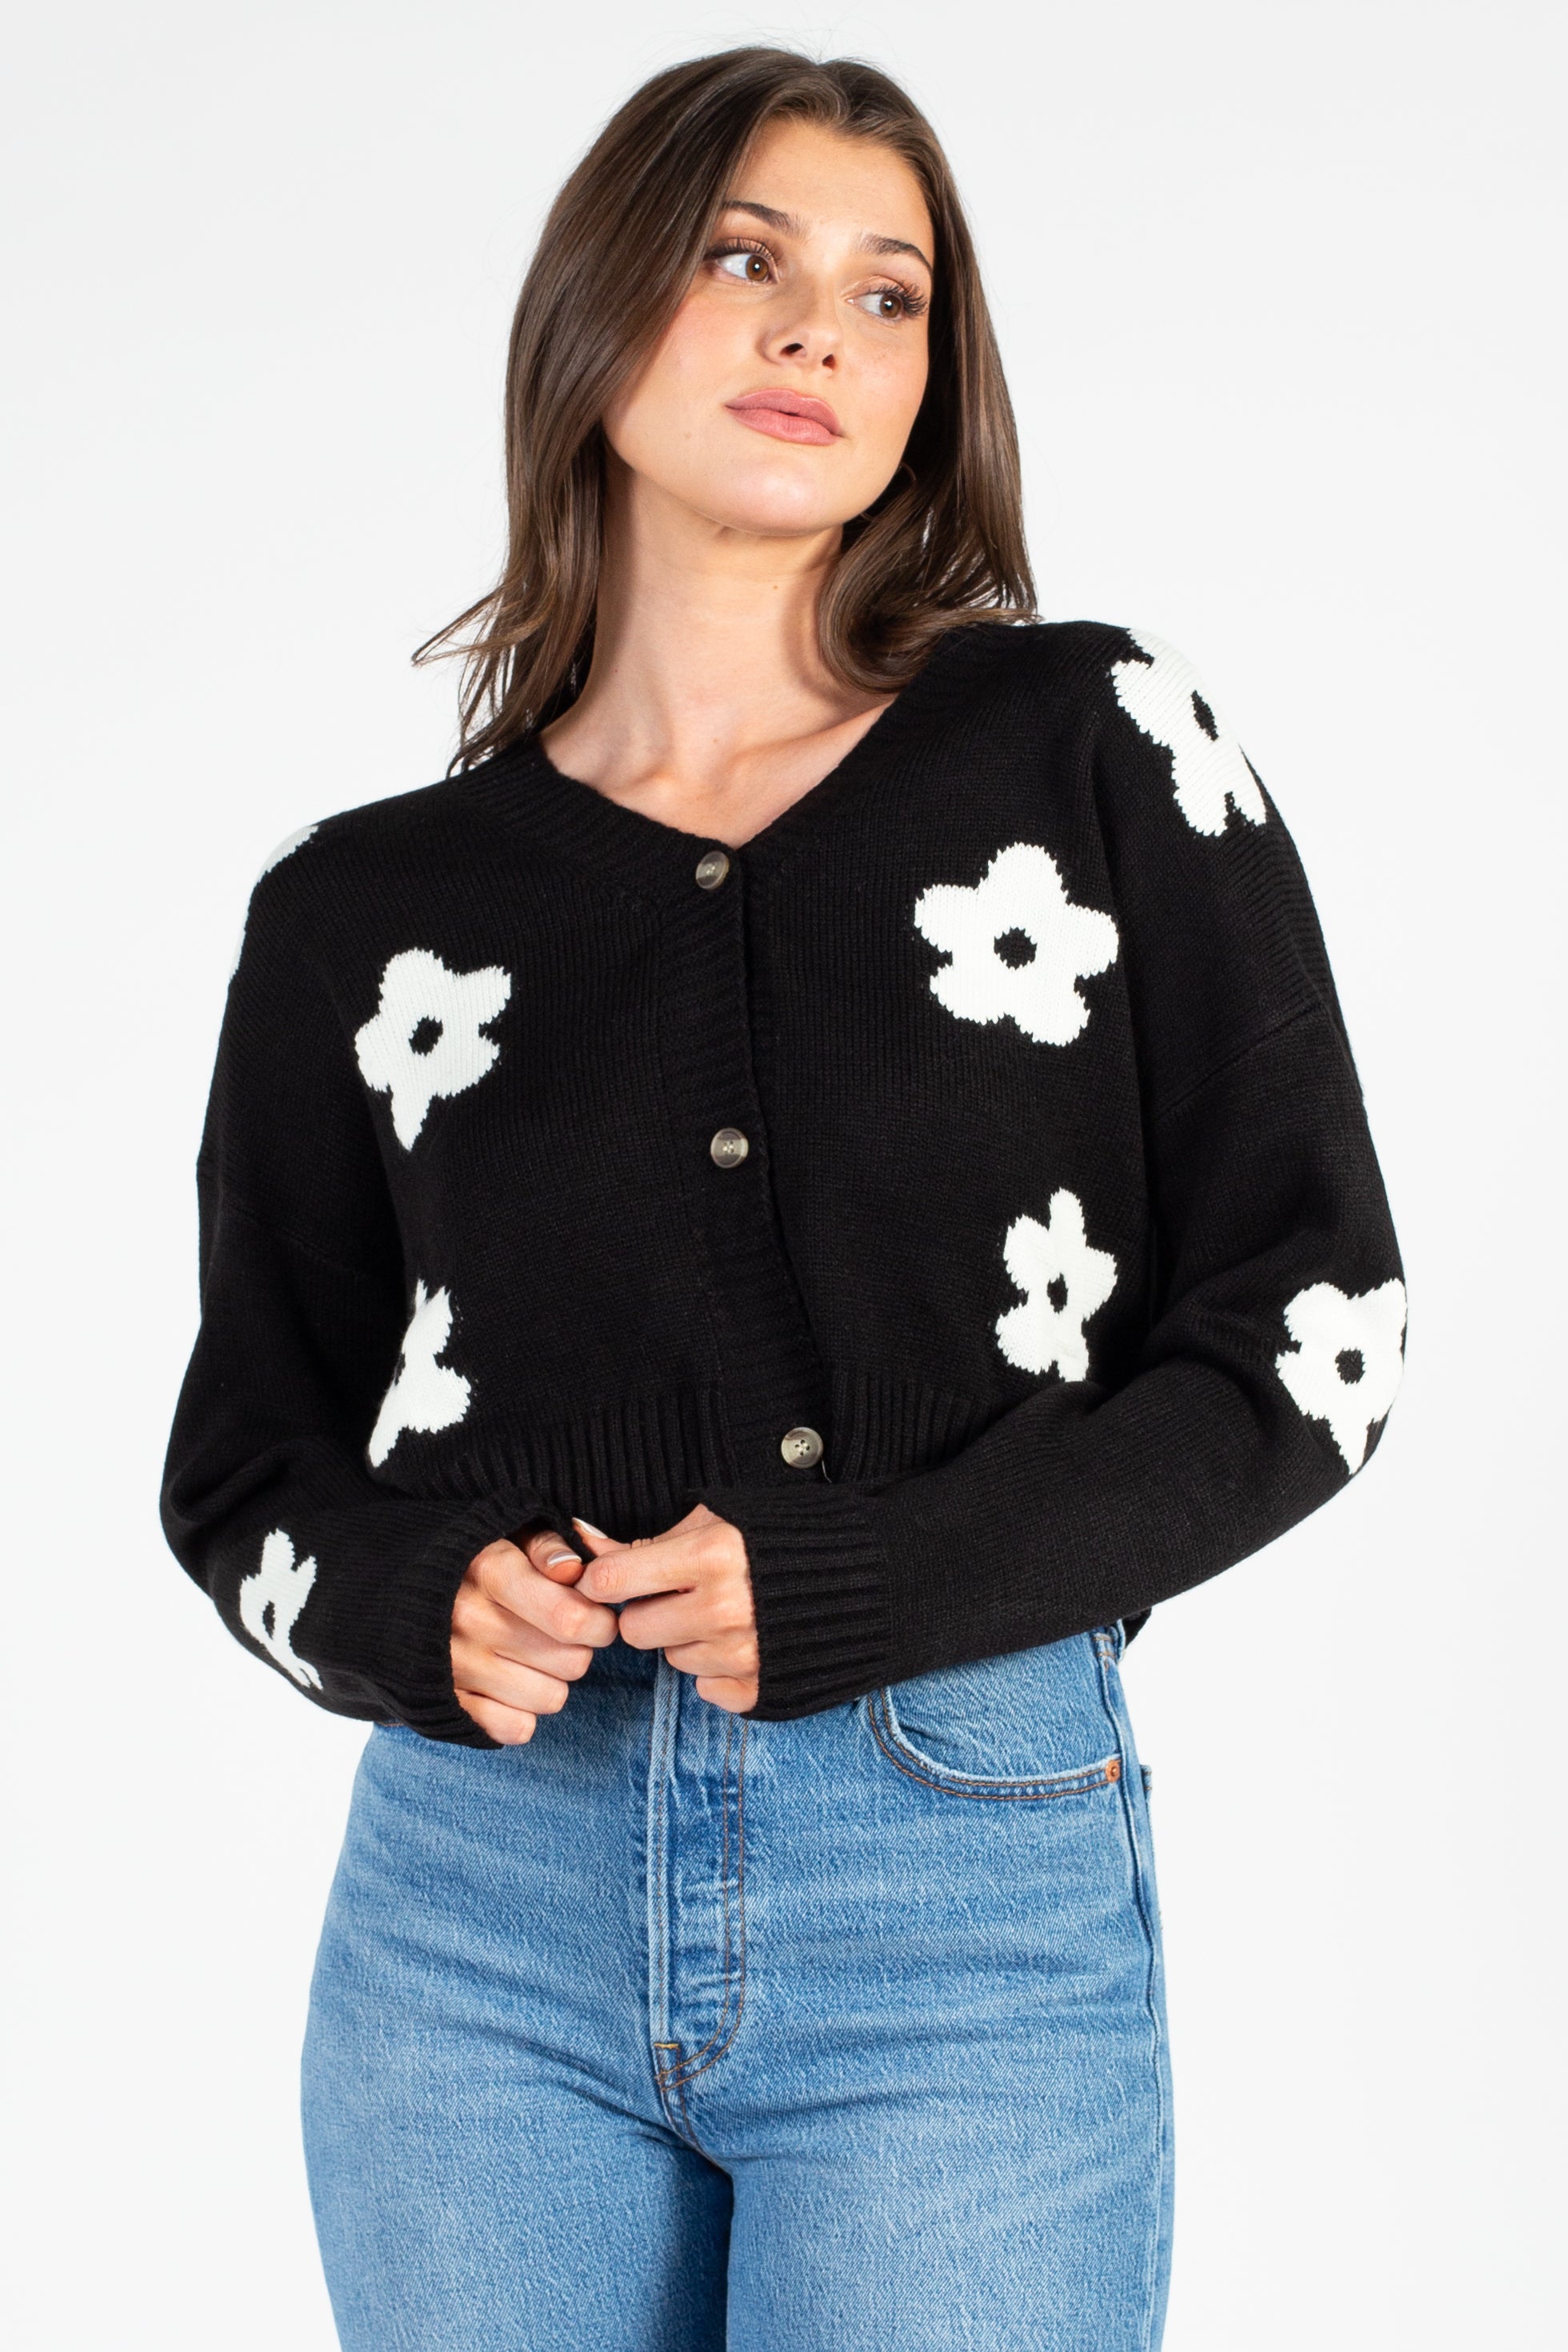 Chelsea Button Up Knit Flower Cardigan